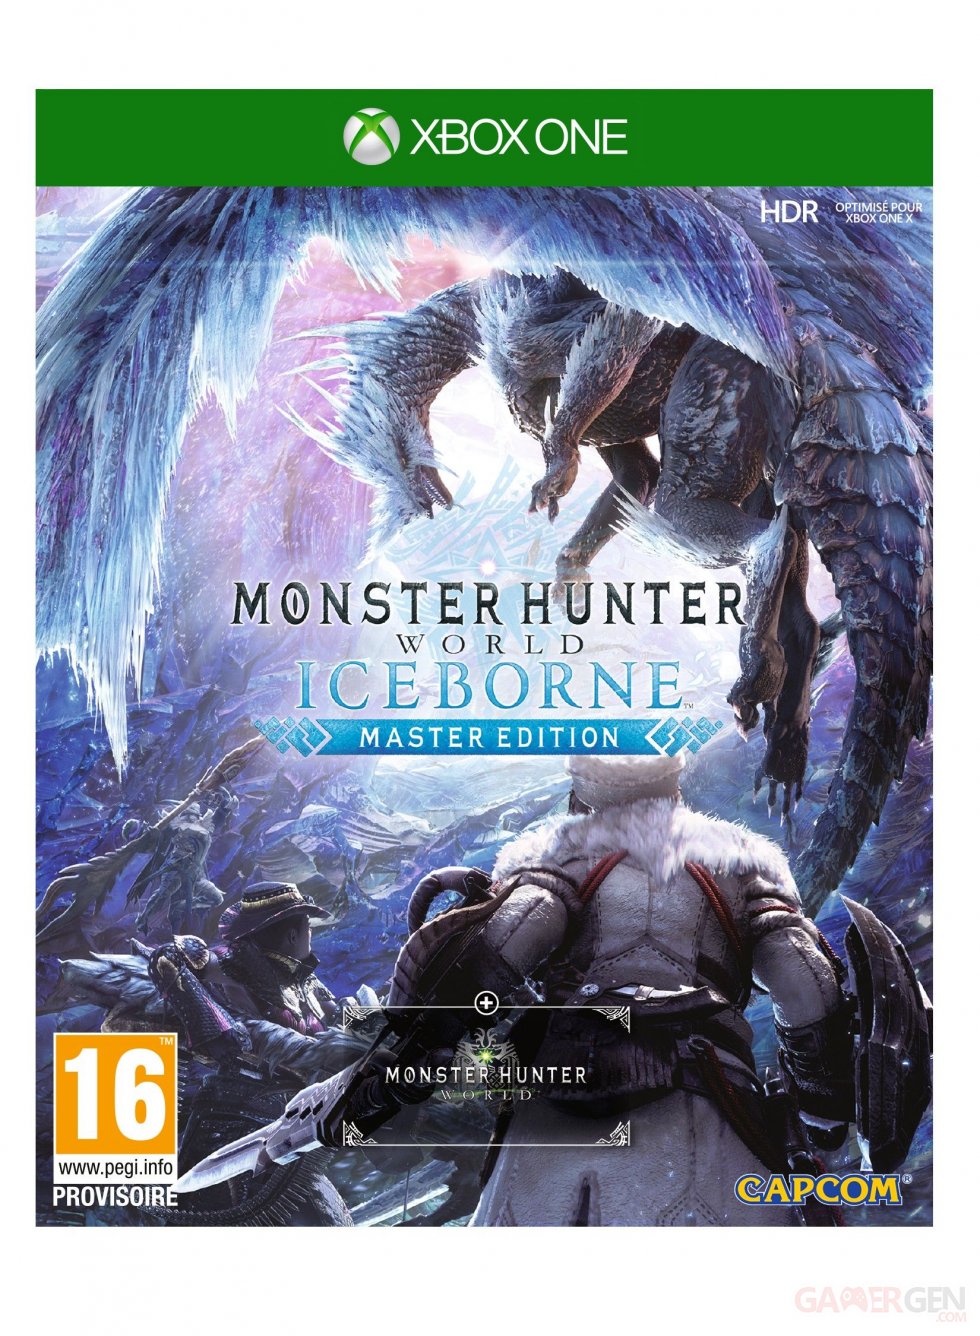 Monster-Hunter-World-Master-Edition-jaquette-Xbox-One-03-10-05-2019